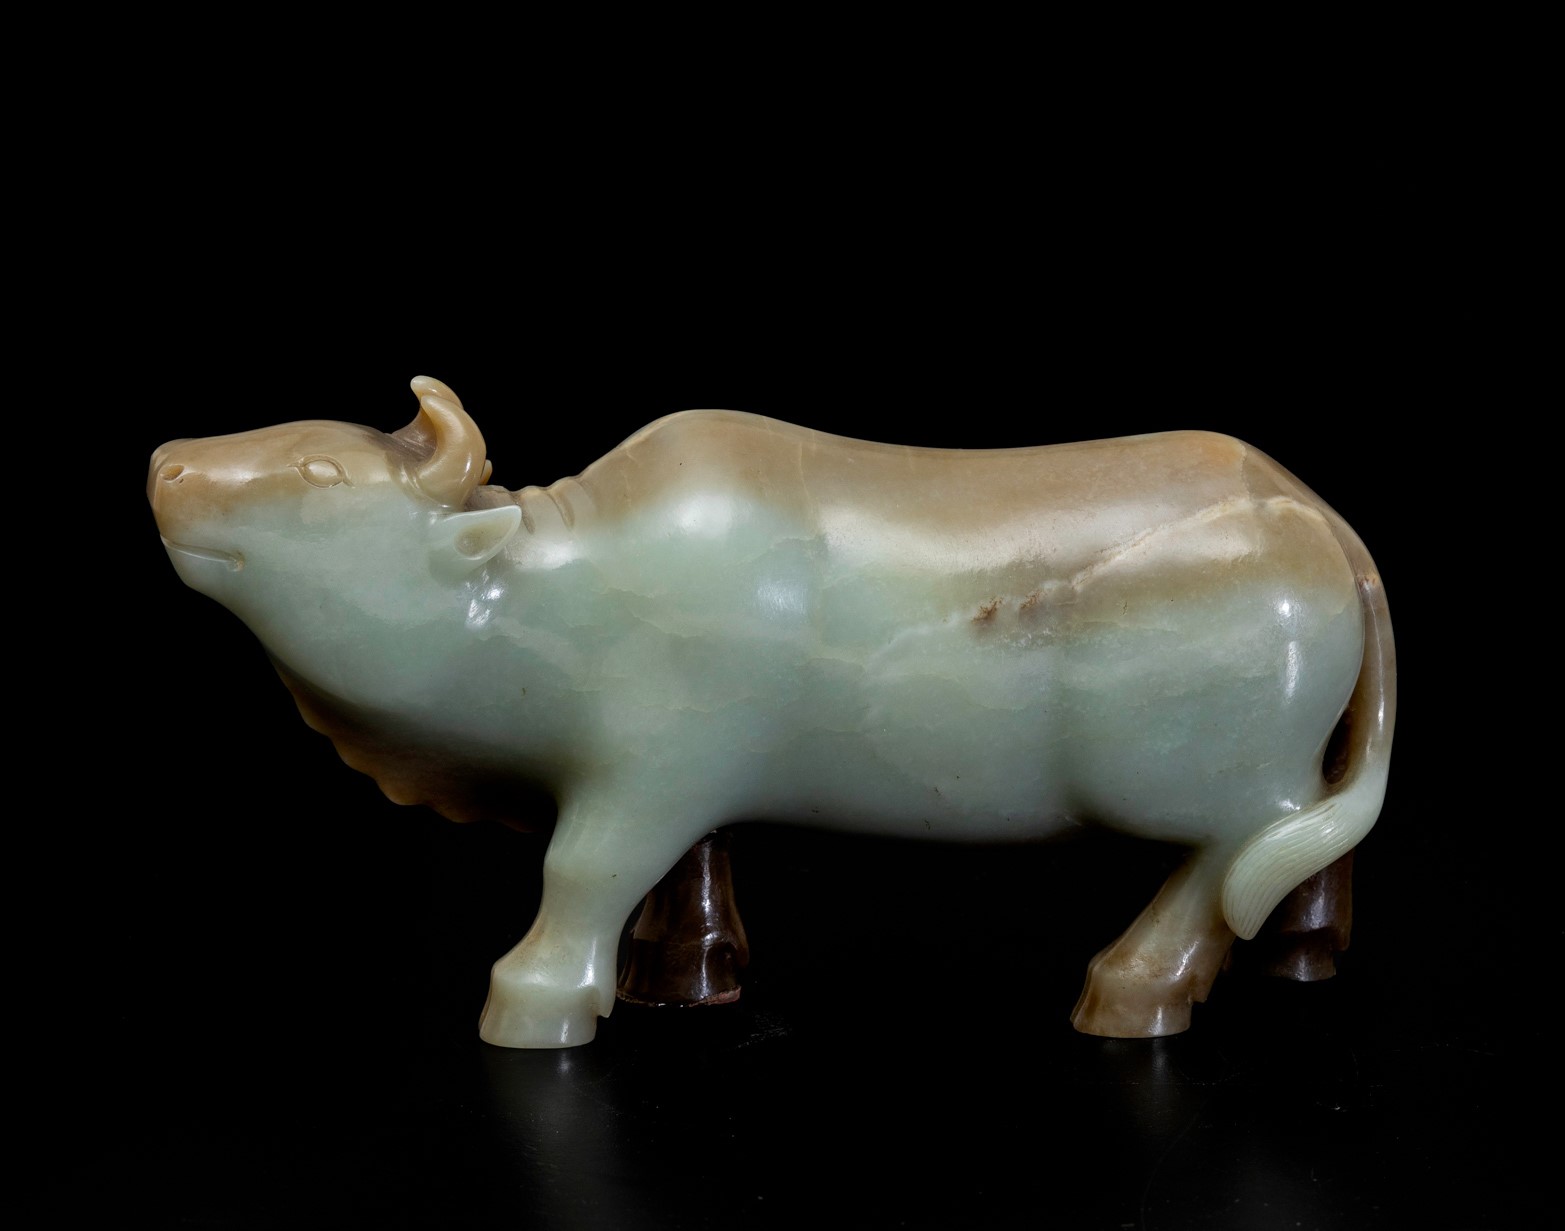 A Celadon jade and russet ox, China, Qing Dynasty - 18th-19th century. 10x20cm - - Image 2 of 3